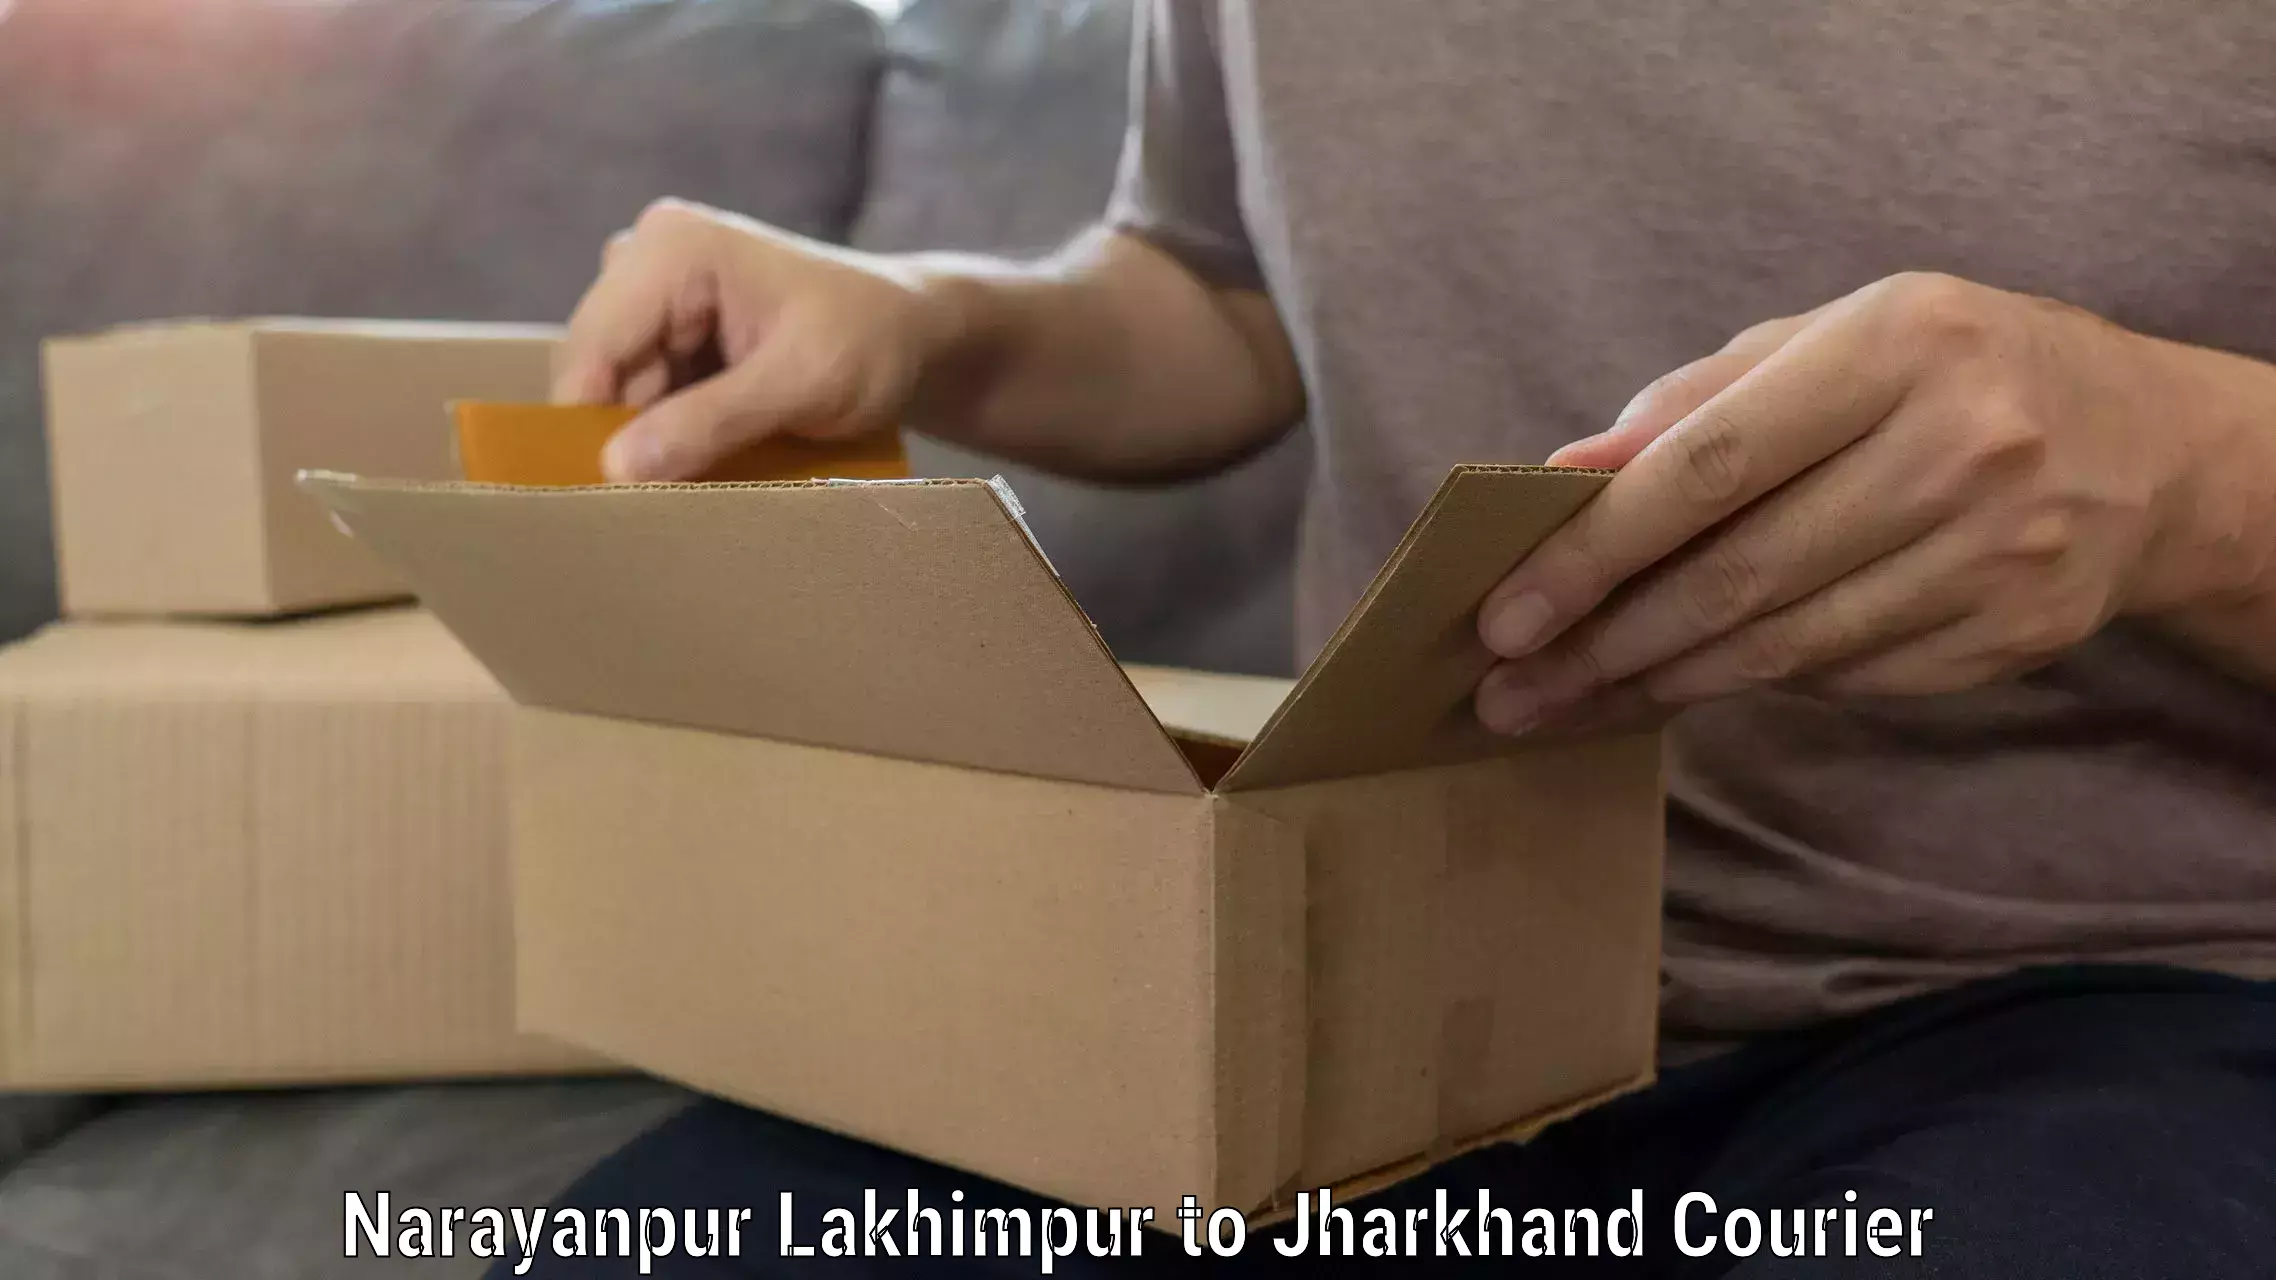 Efficient moving company Narayanpur Lakhimpur to Birla Institute of Technology Ranchi